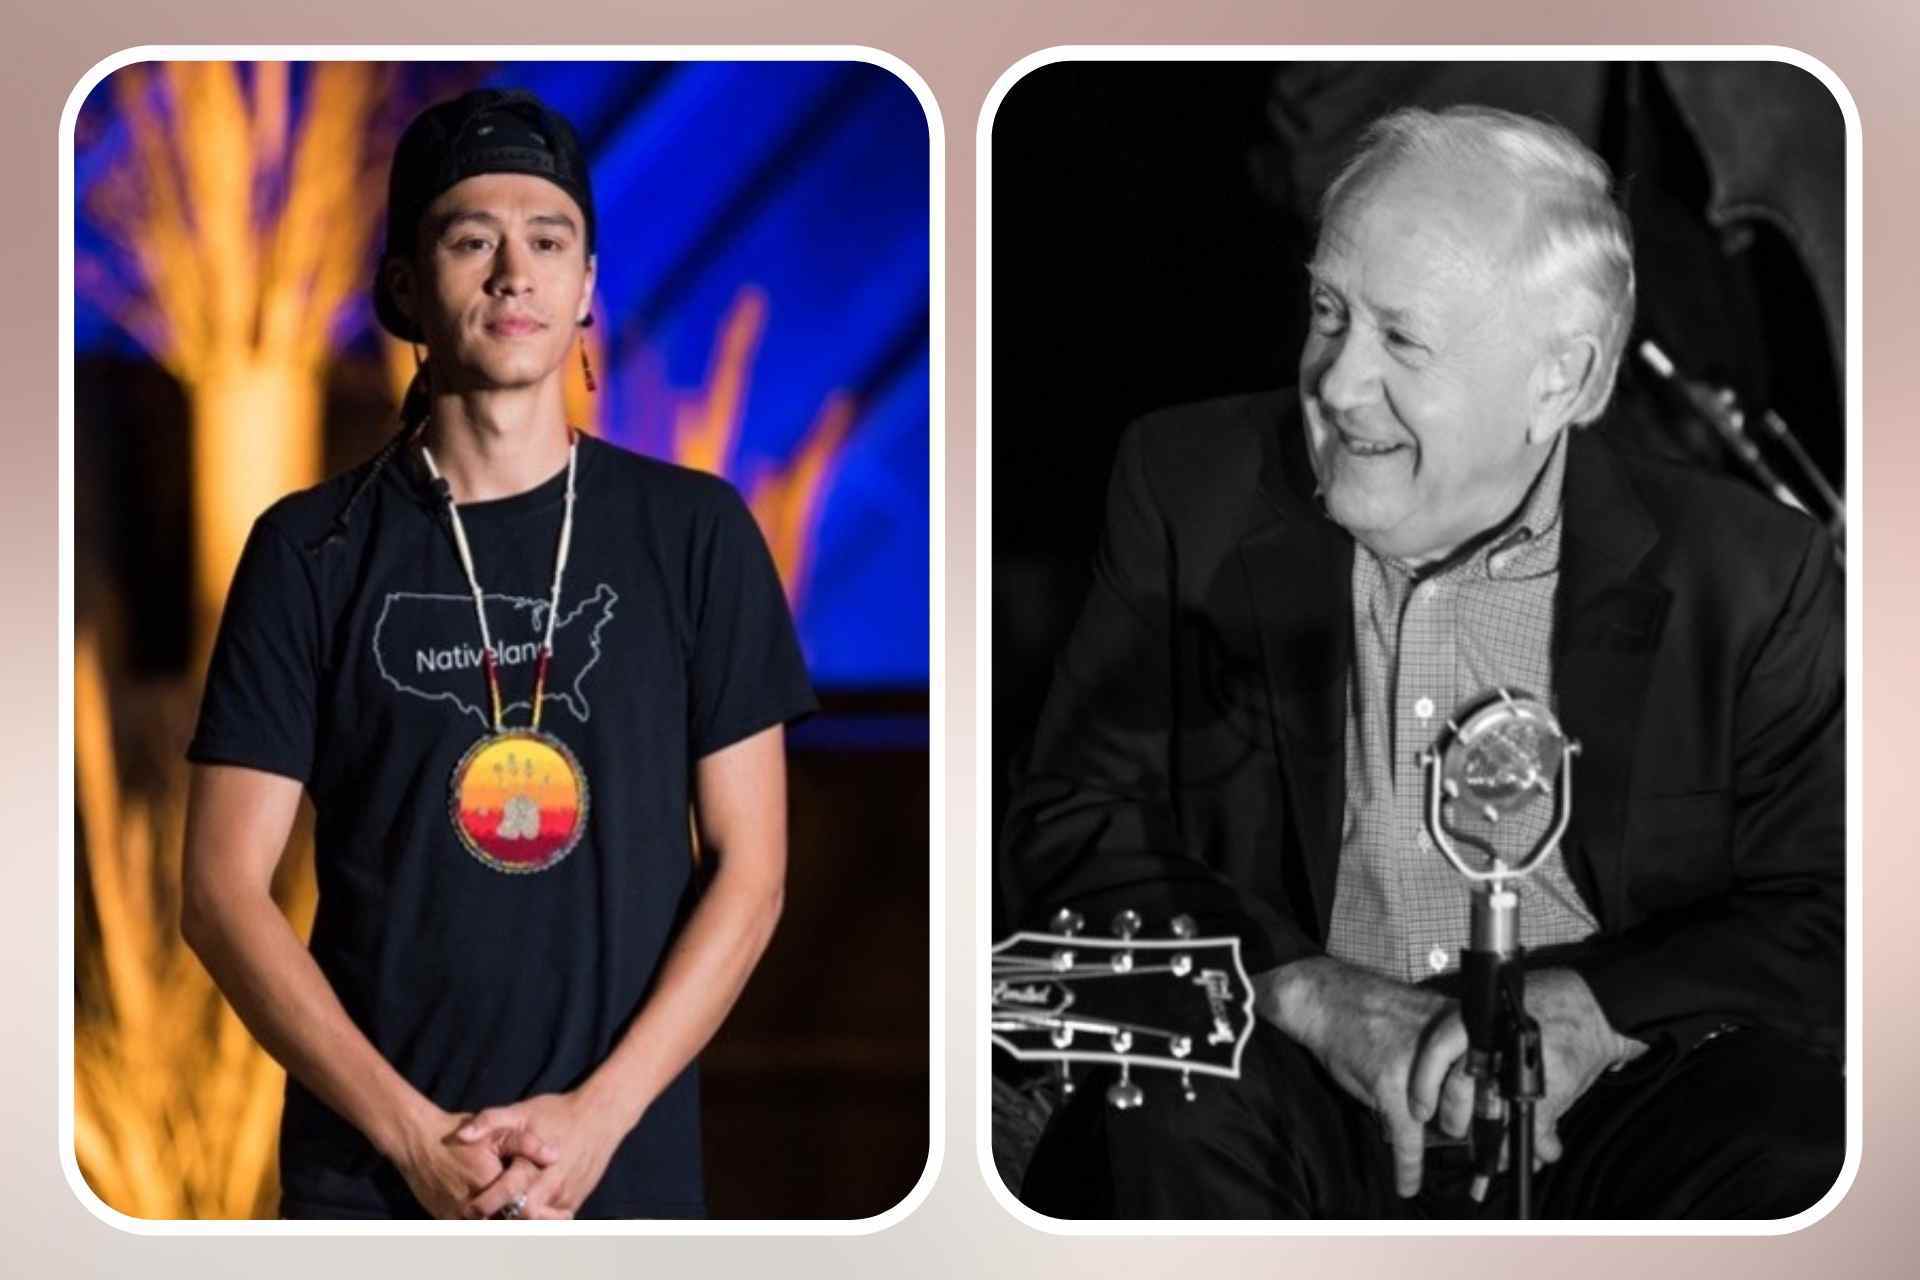 Photos by Elman Studio LLC – (from left to right) – FRANK WALN (American Roots) and LESLIE JORDAN (Country)